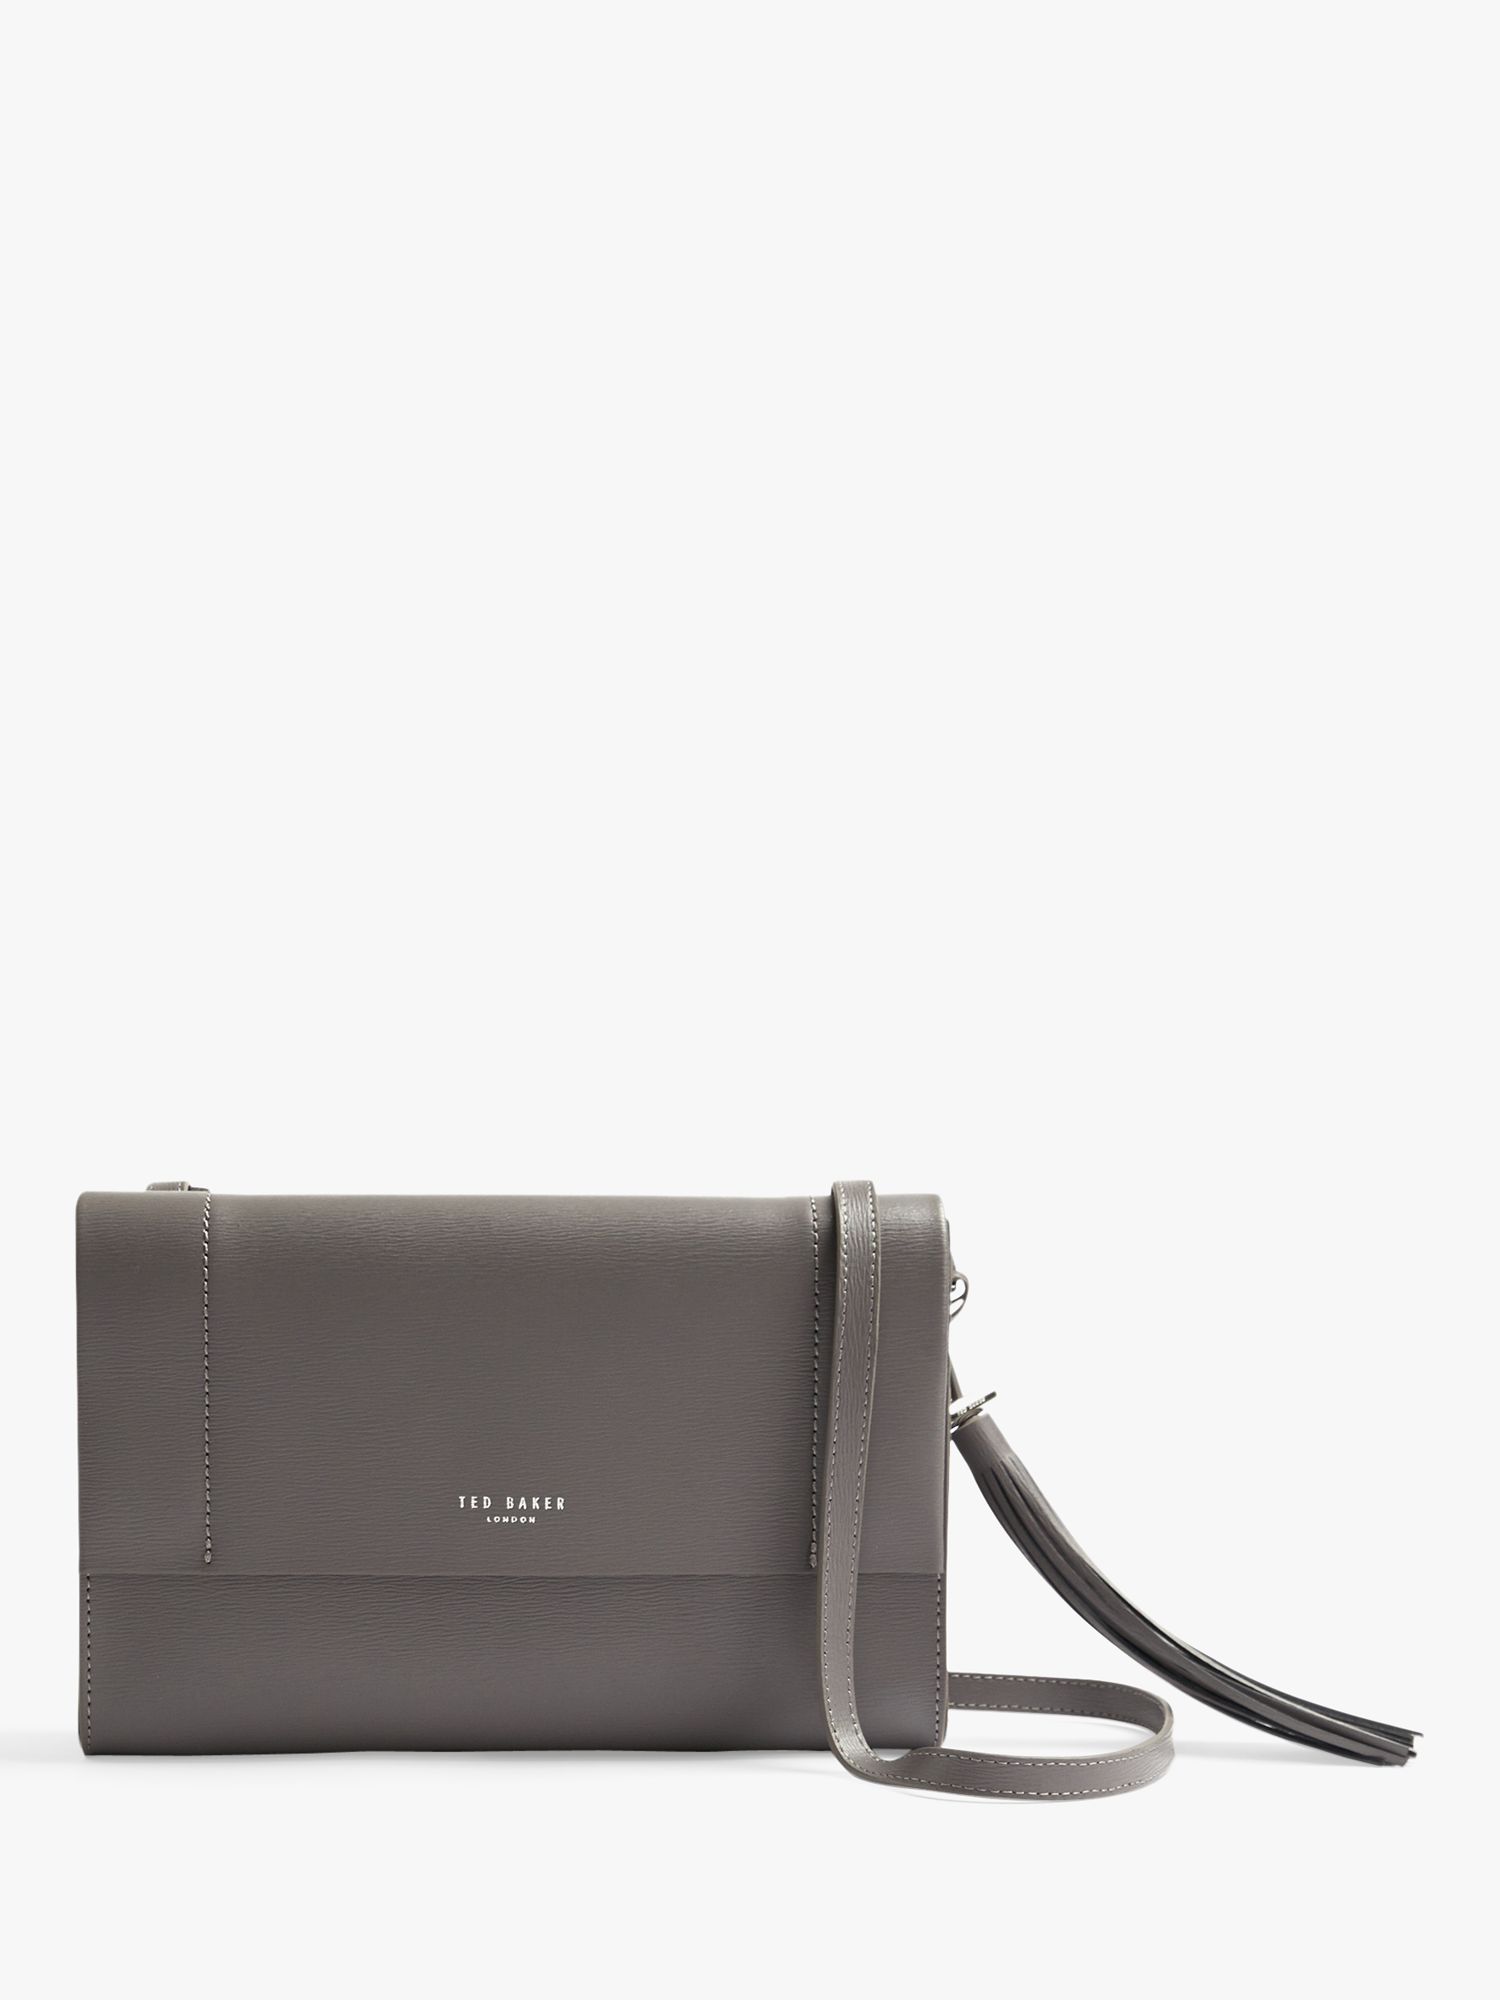 Ted Baker Natalei Leather Cross Body Bag at John Lewis & Partners